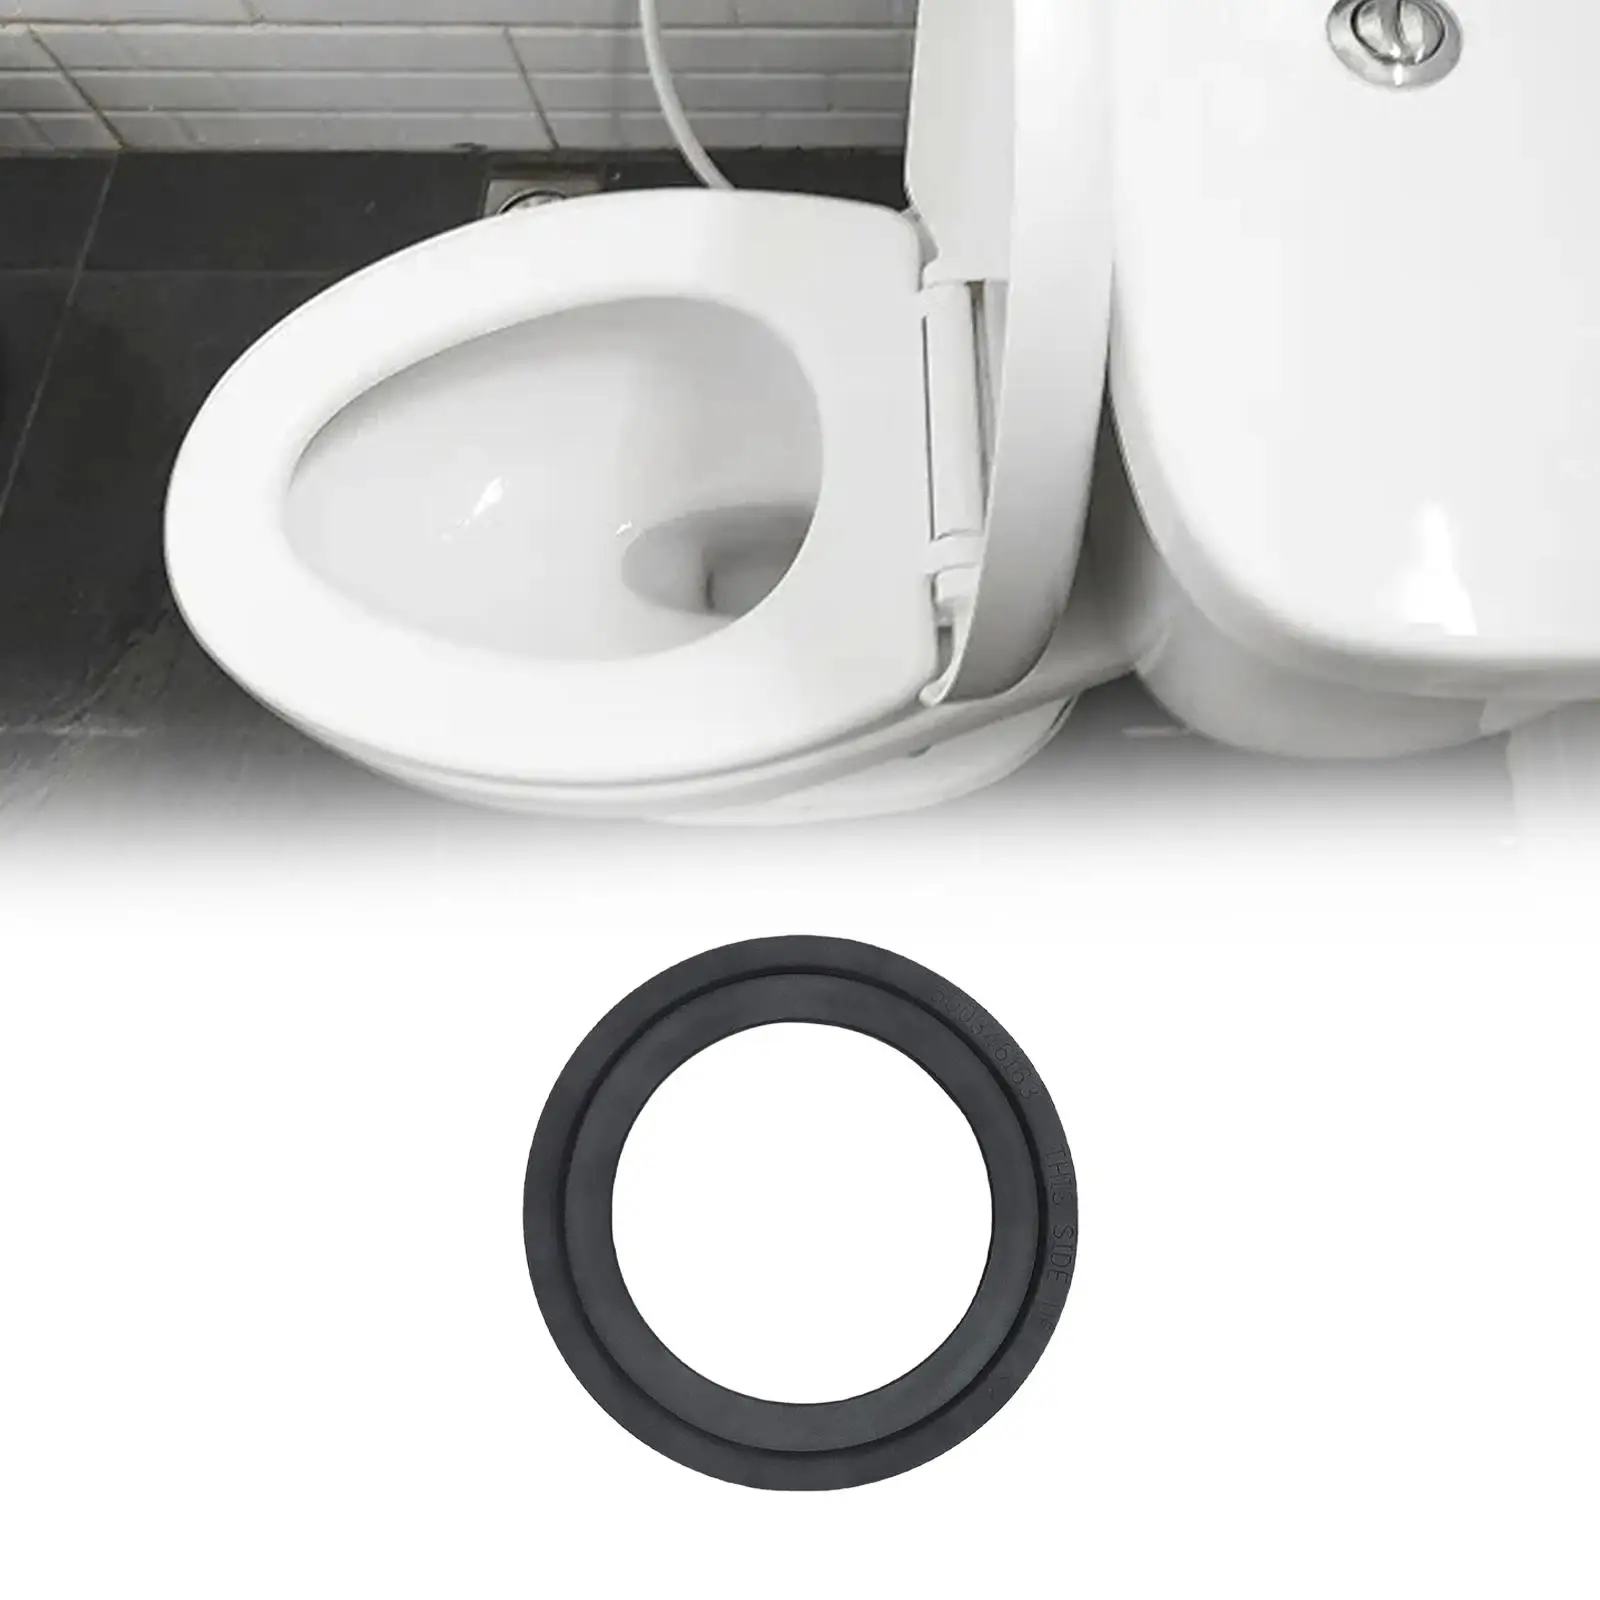 RV Toilet Flush Ball Seal Replace Parts Flush Ball Gaskets for 300 310 320 RV Toilet Easy Installation Stable Performance